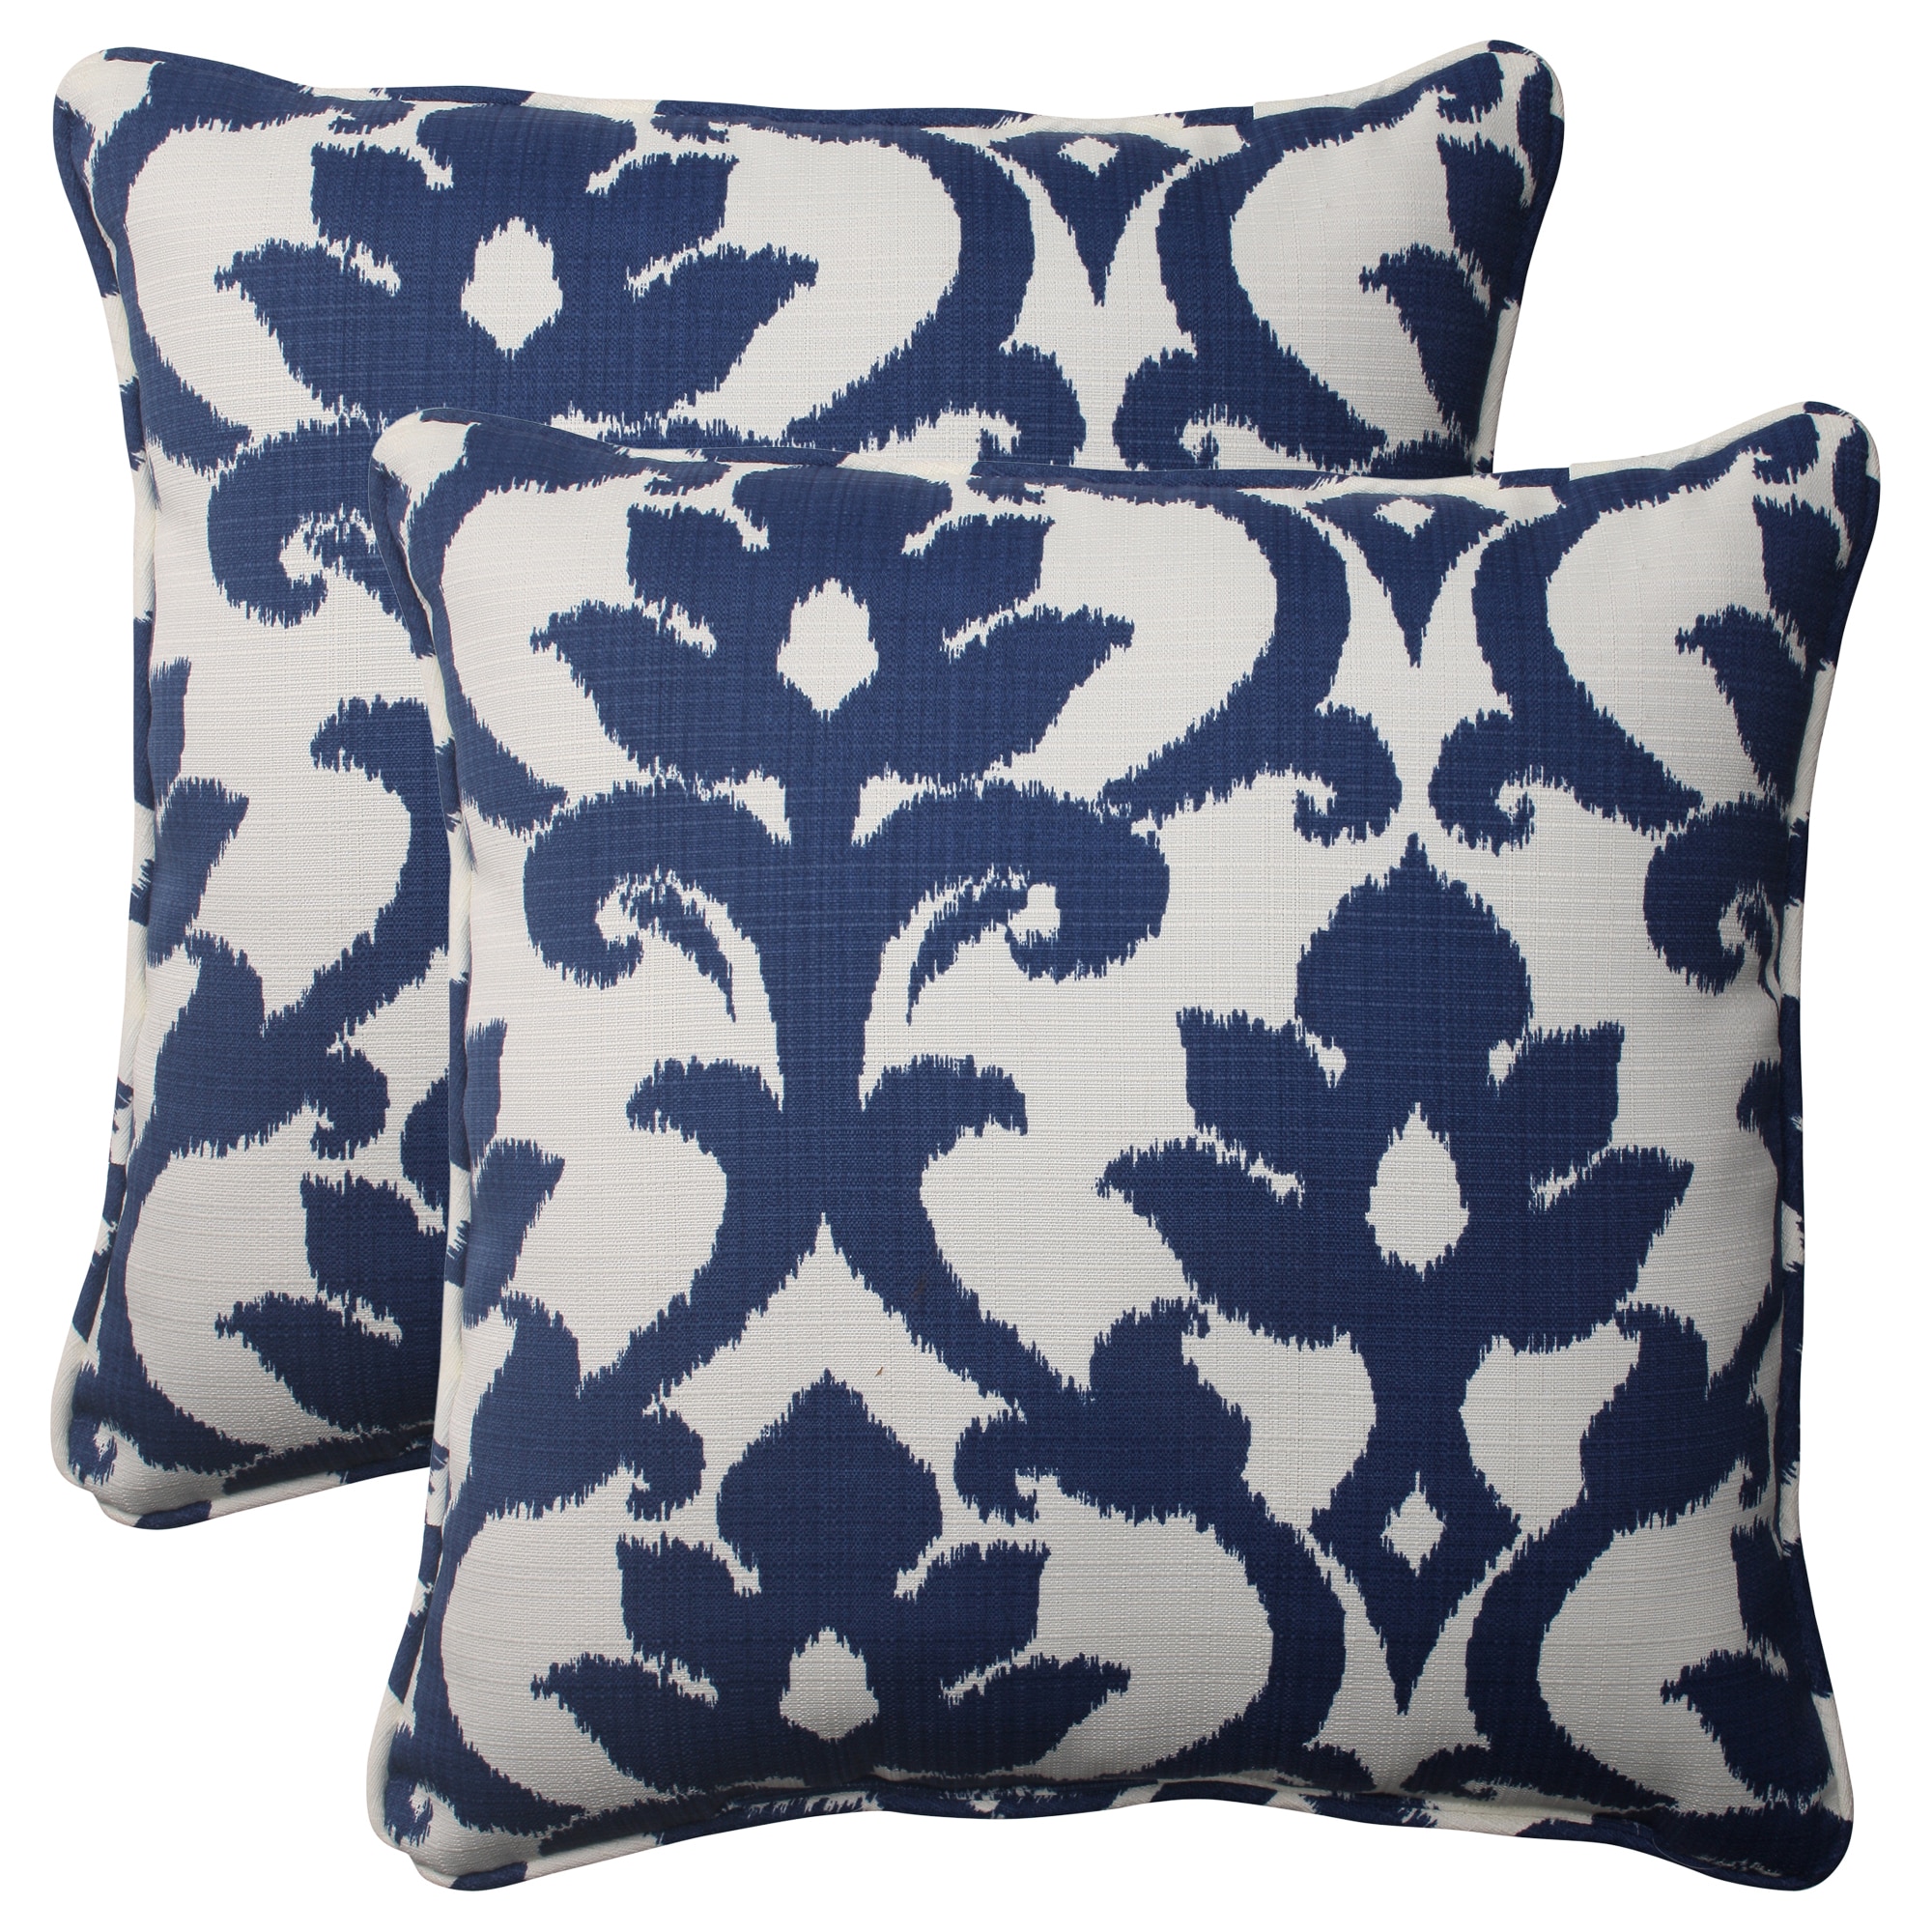 navy and white pillows